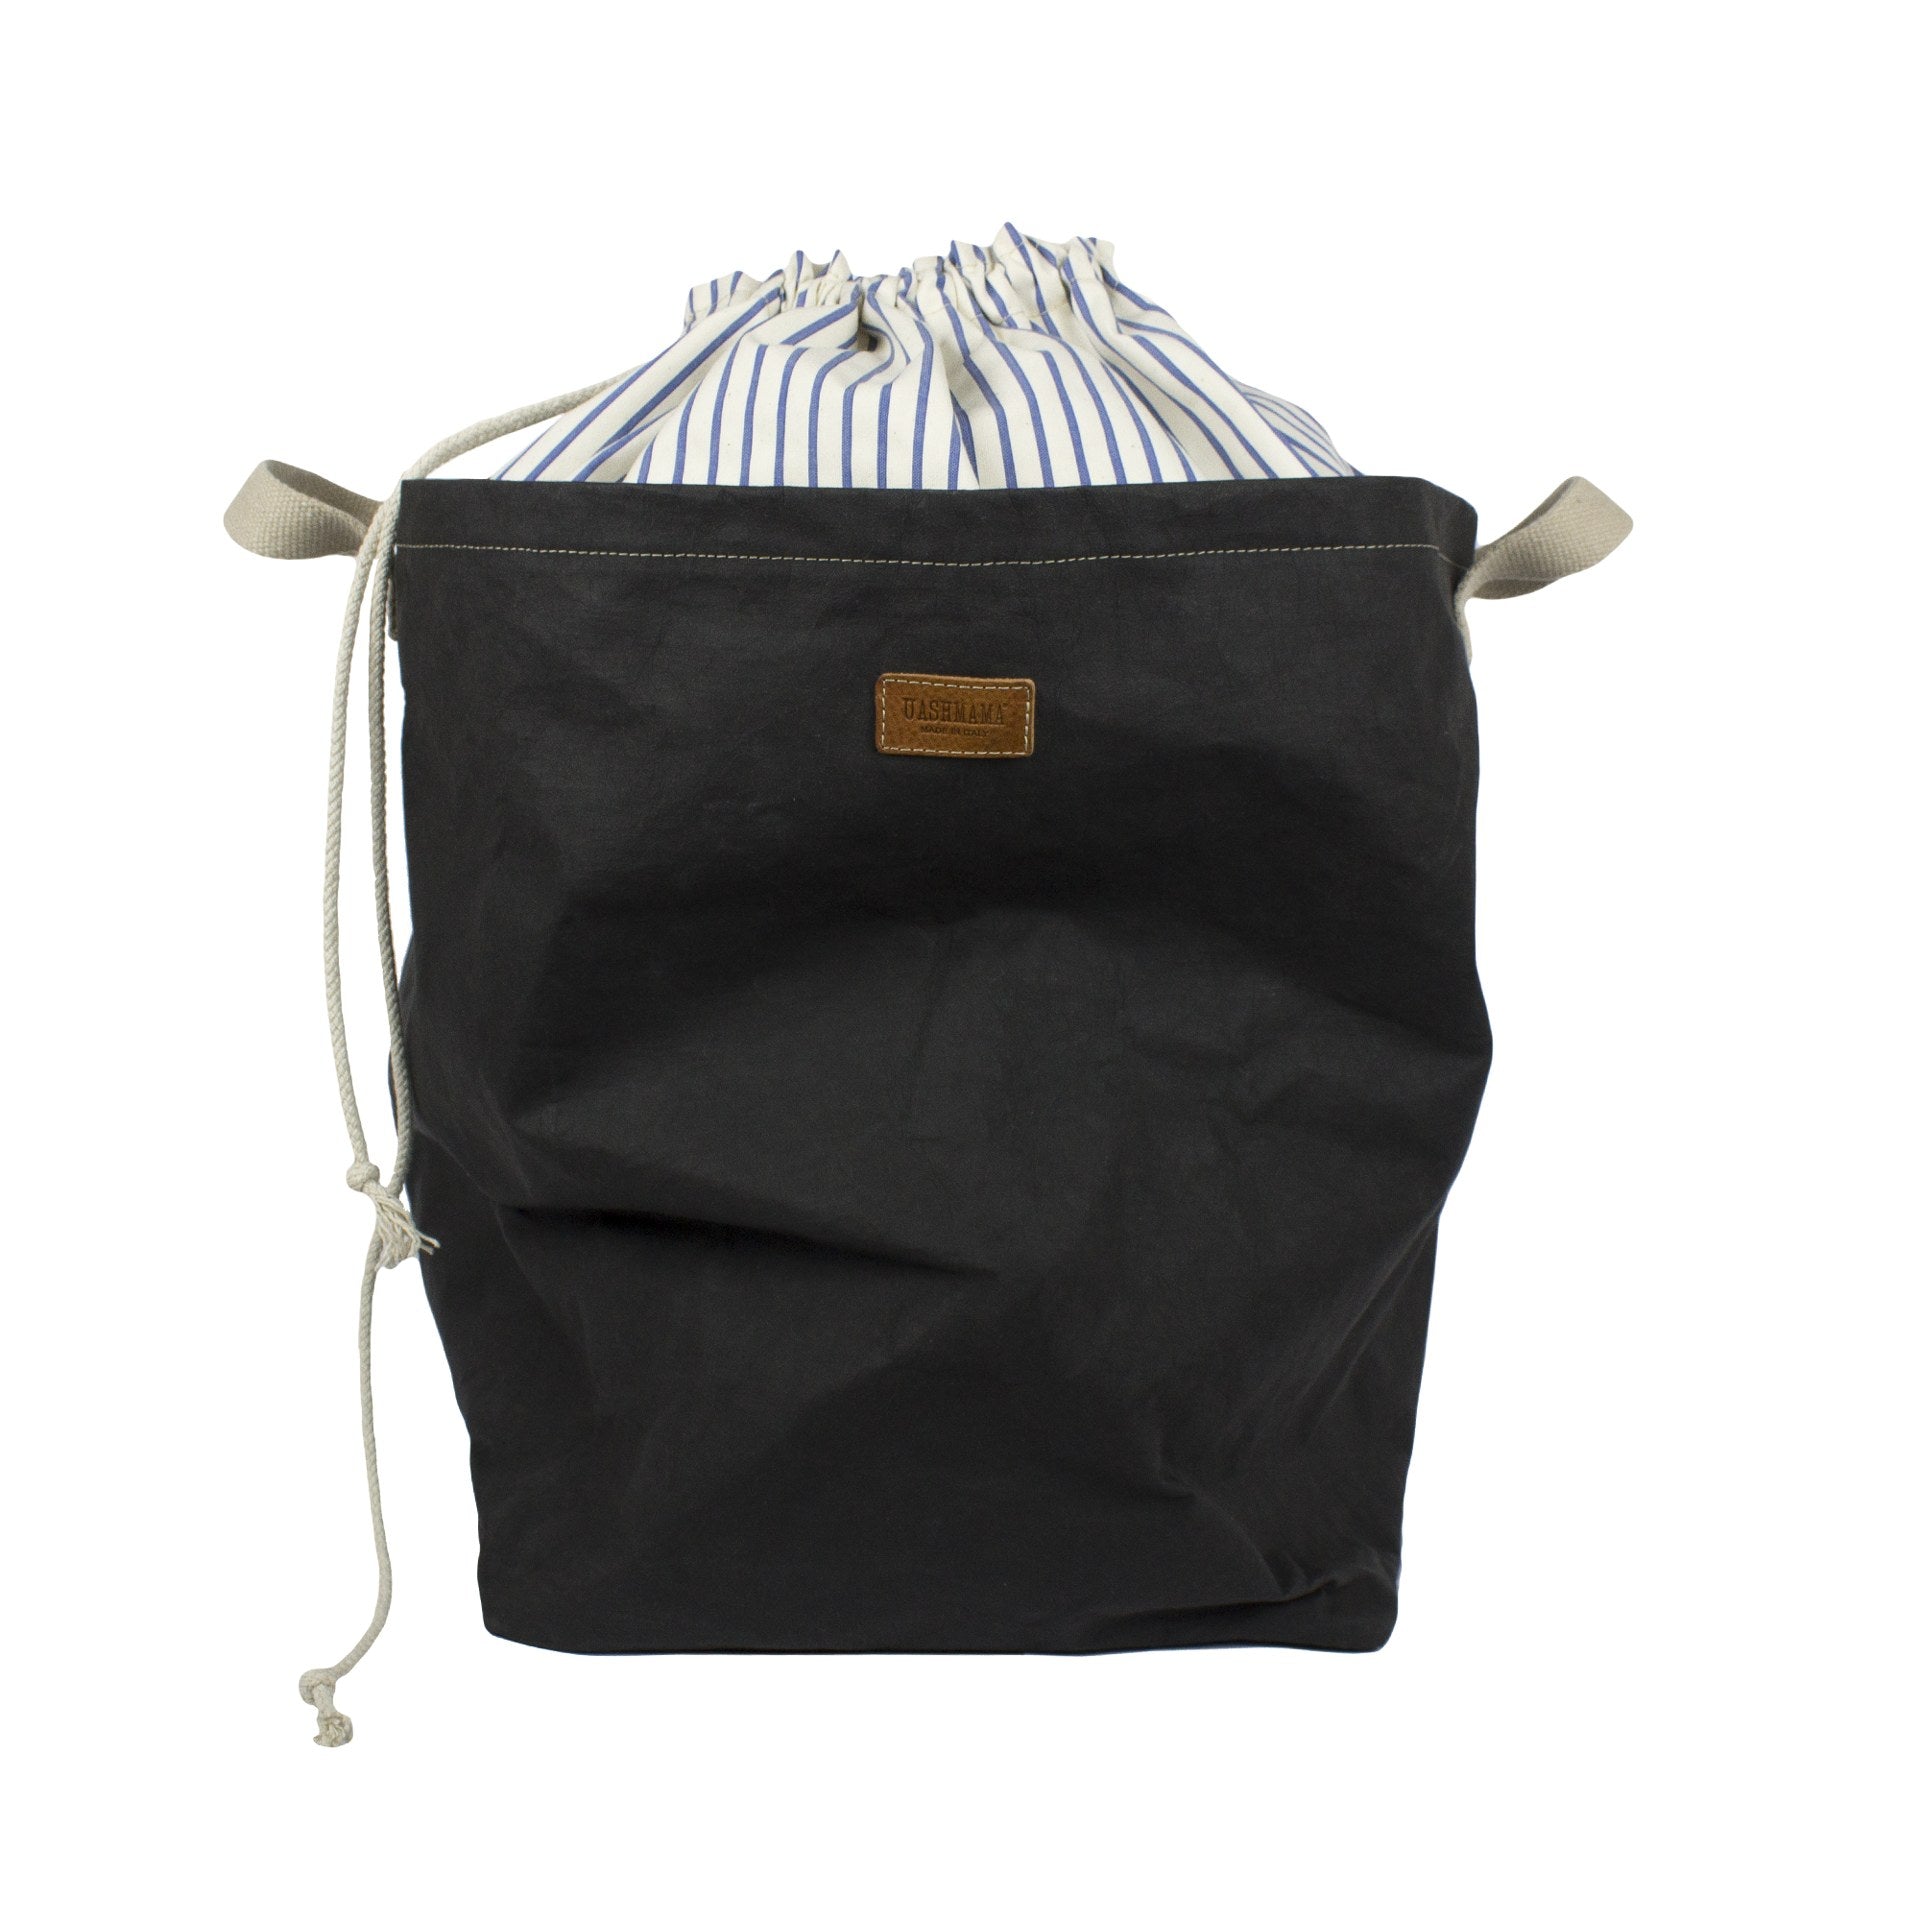 Drawstring Laundry or Storage Bag in Black Color. Striped Cotton and Washable Paper Material